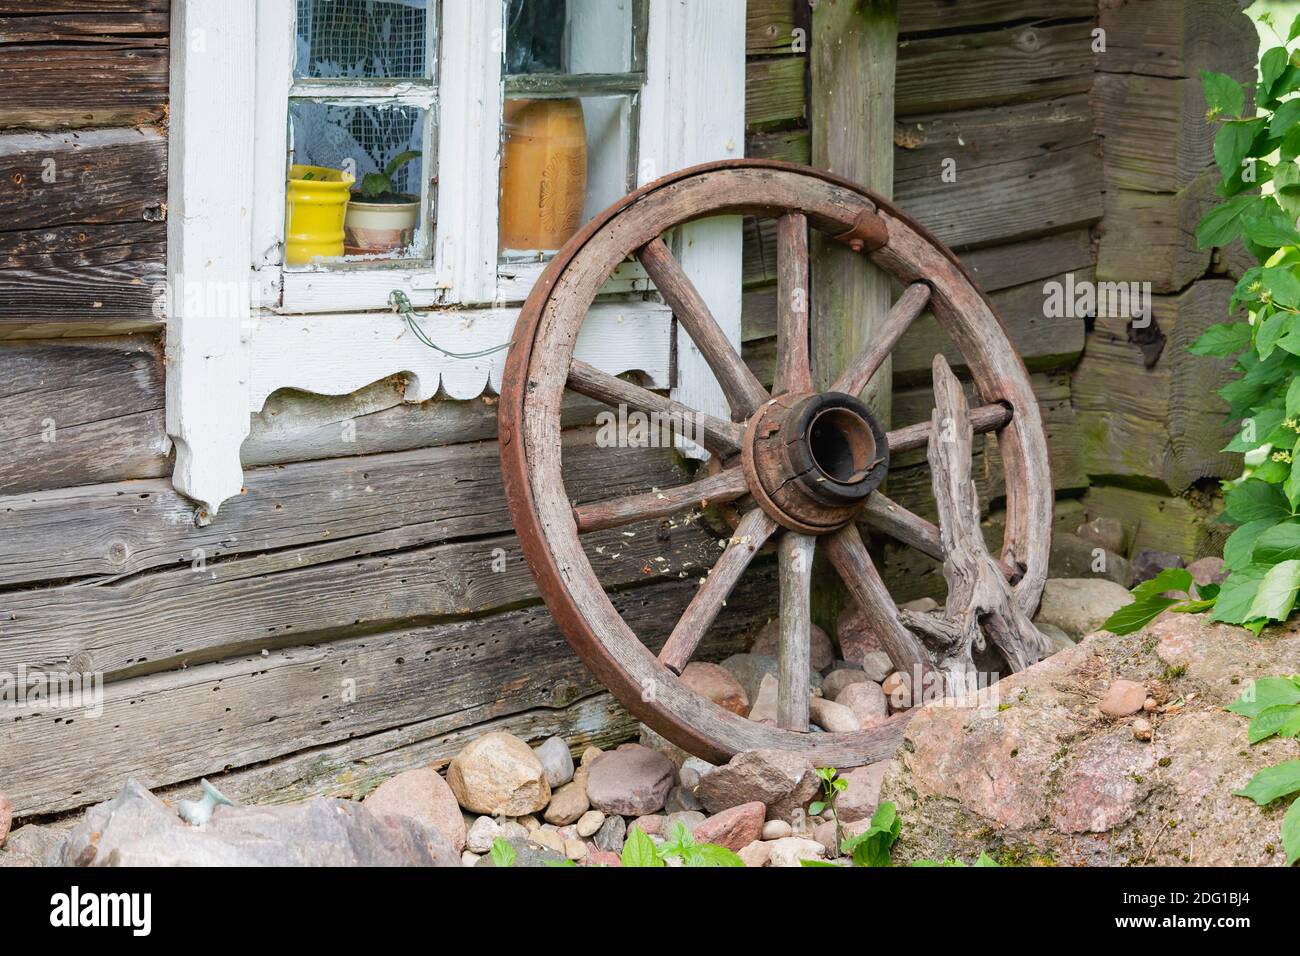 Old wooden wheel in willage near old wodden house in Lithuania Stock Photo